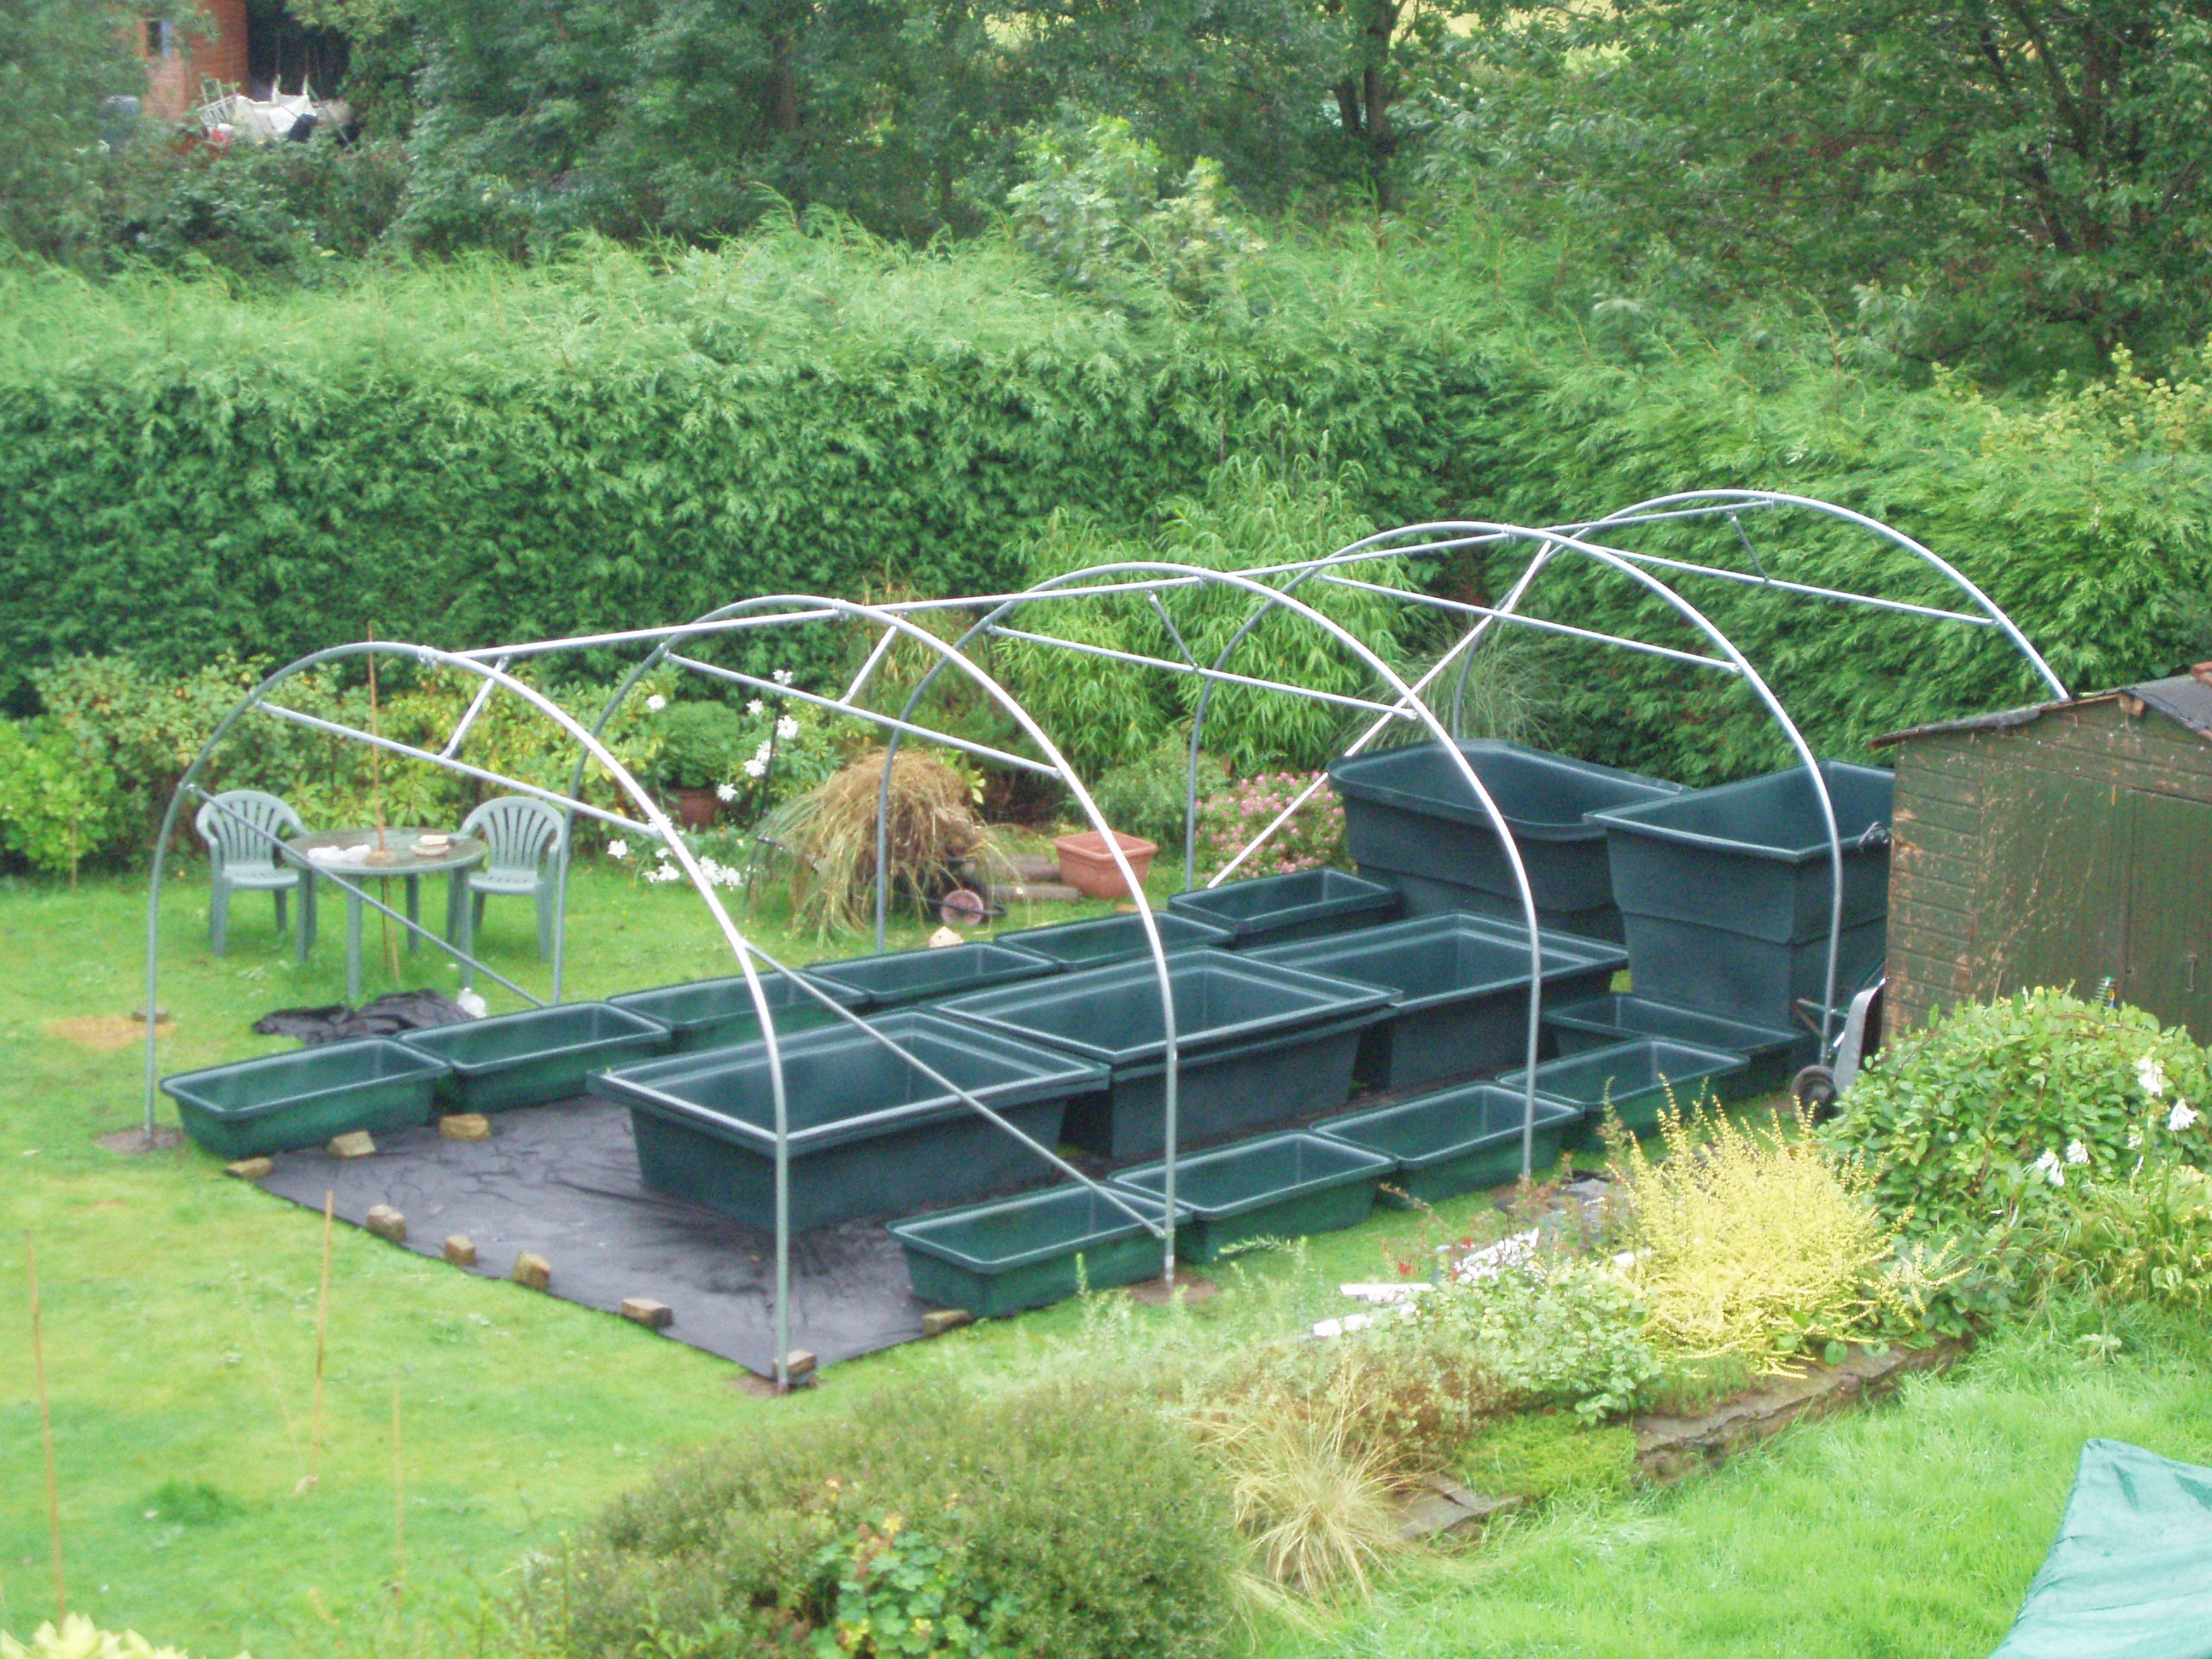 Developing our Aquaponics system | Garden Aquaponics in the UK